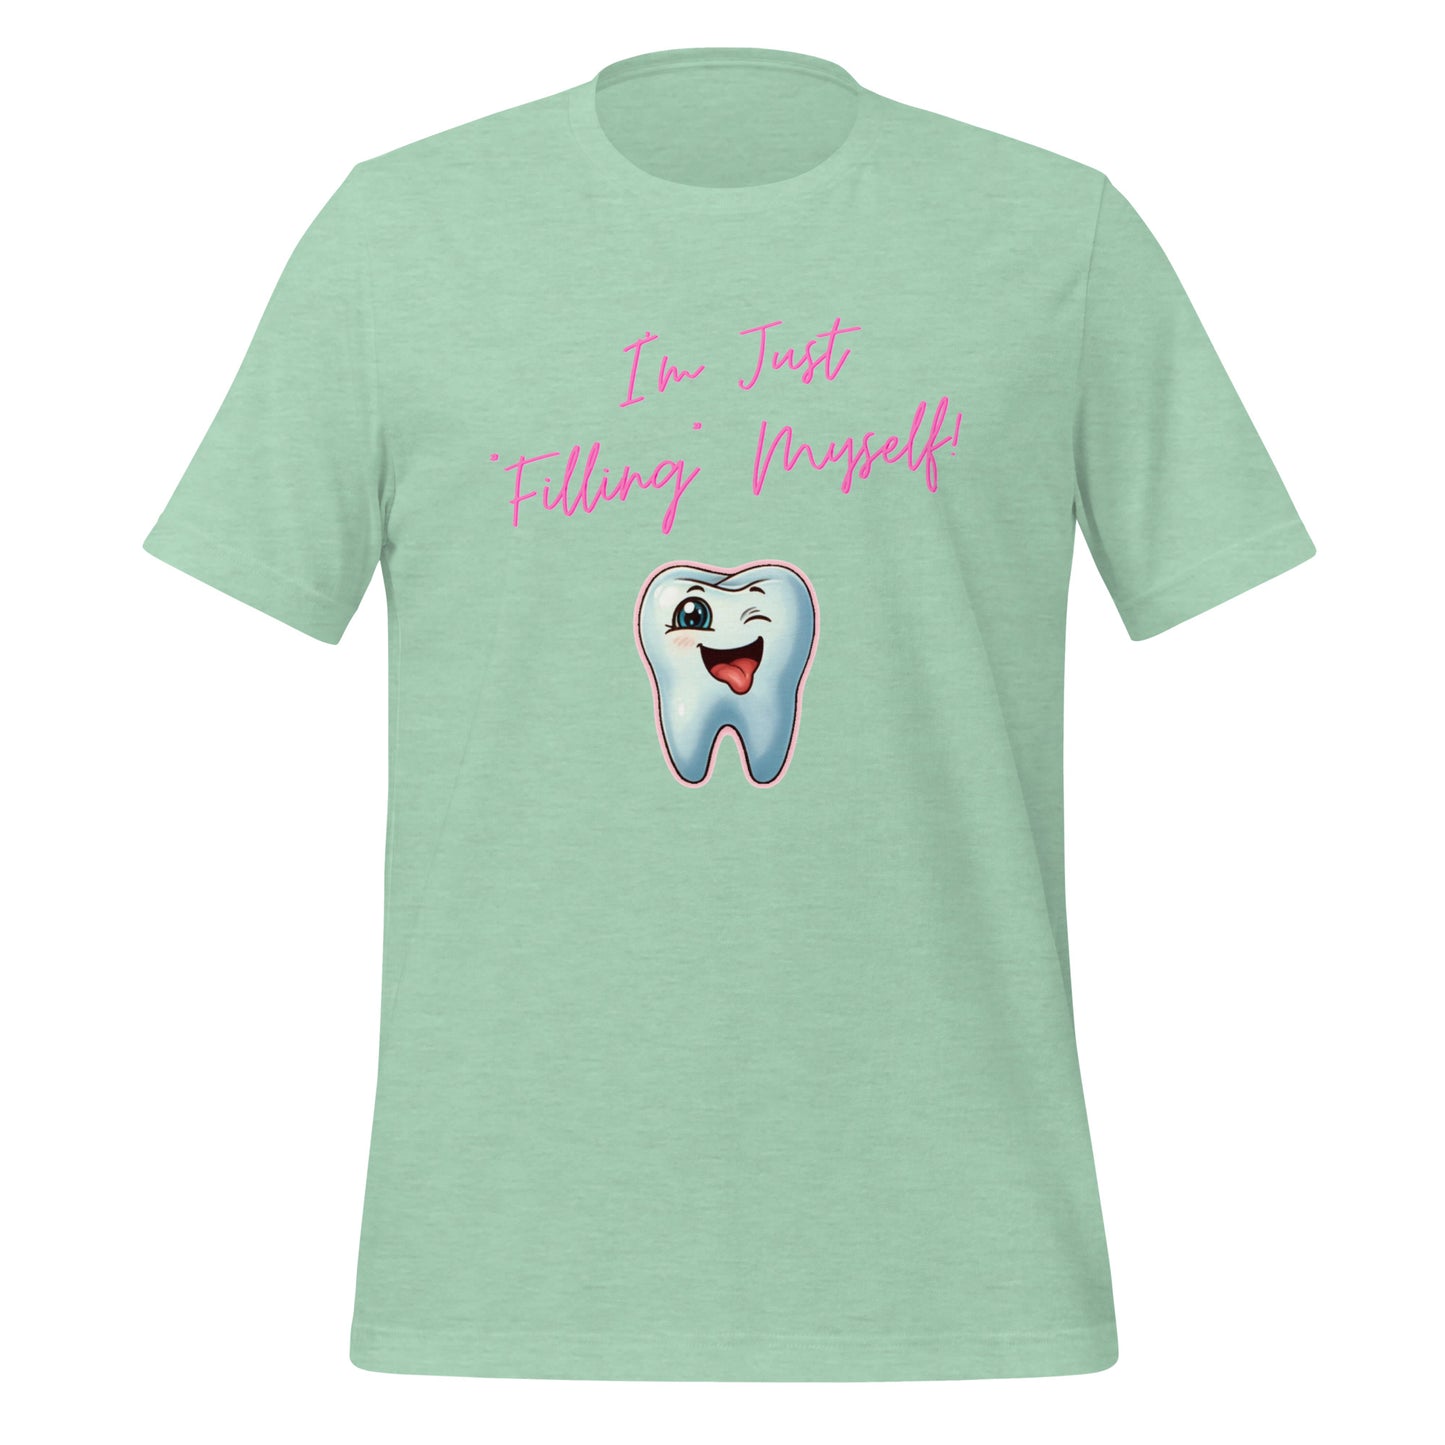 Flirtatious winking cartoon tooth character with the phrase "I'm just filling myself!" Ideal for a funny dental t-shirt or a cute dental assistant shirt. Heather prism mint color. 